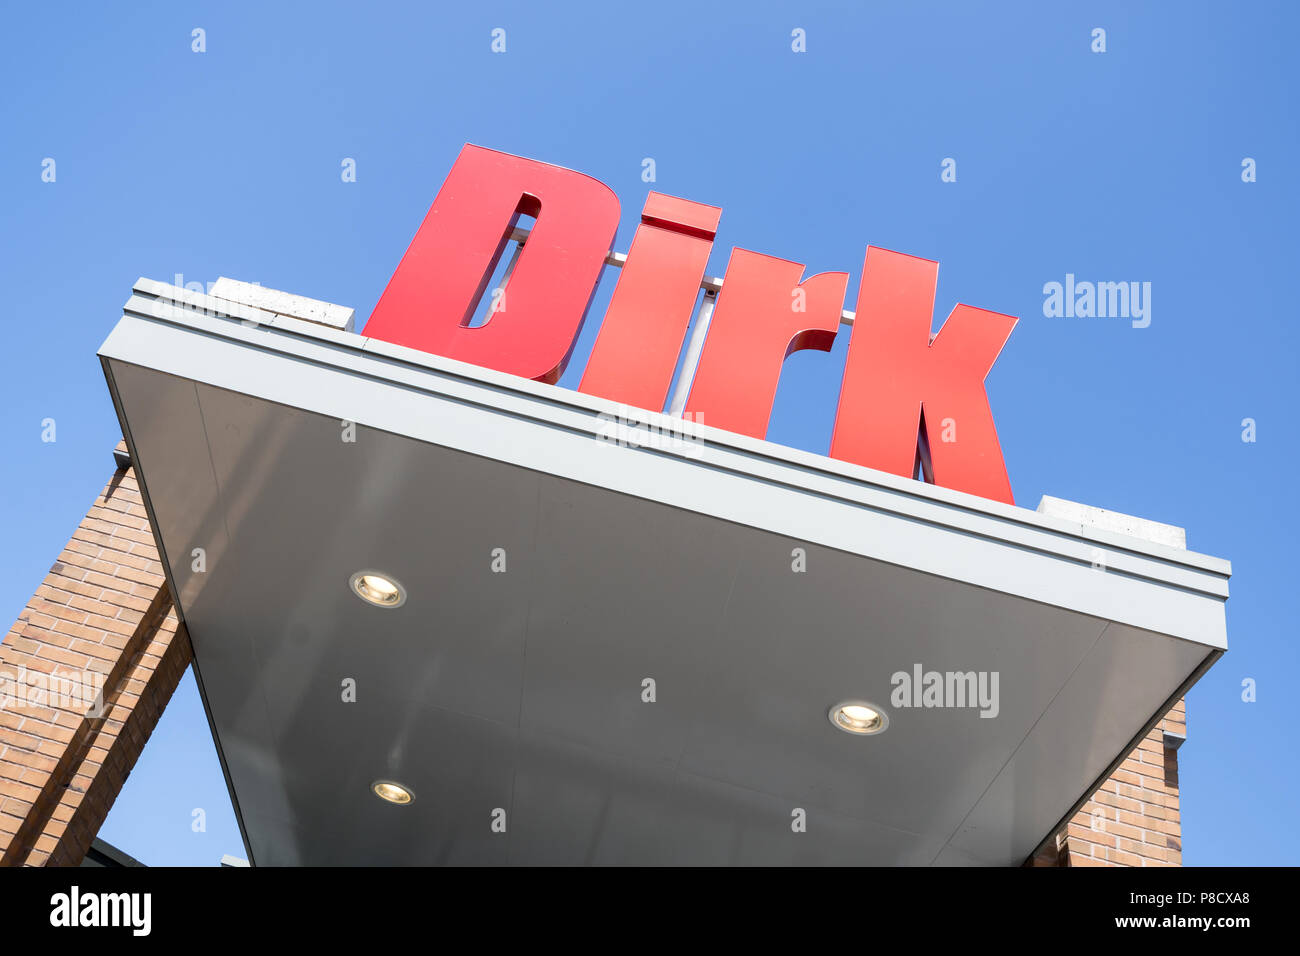 Dirk sign at branch. Dirk van den Broek is a Dutch retail company and a member of Superunie, a Dutch purchasing organization for supermarkets. Stock Photo